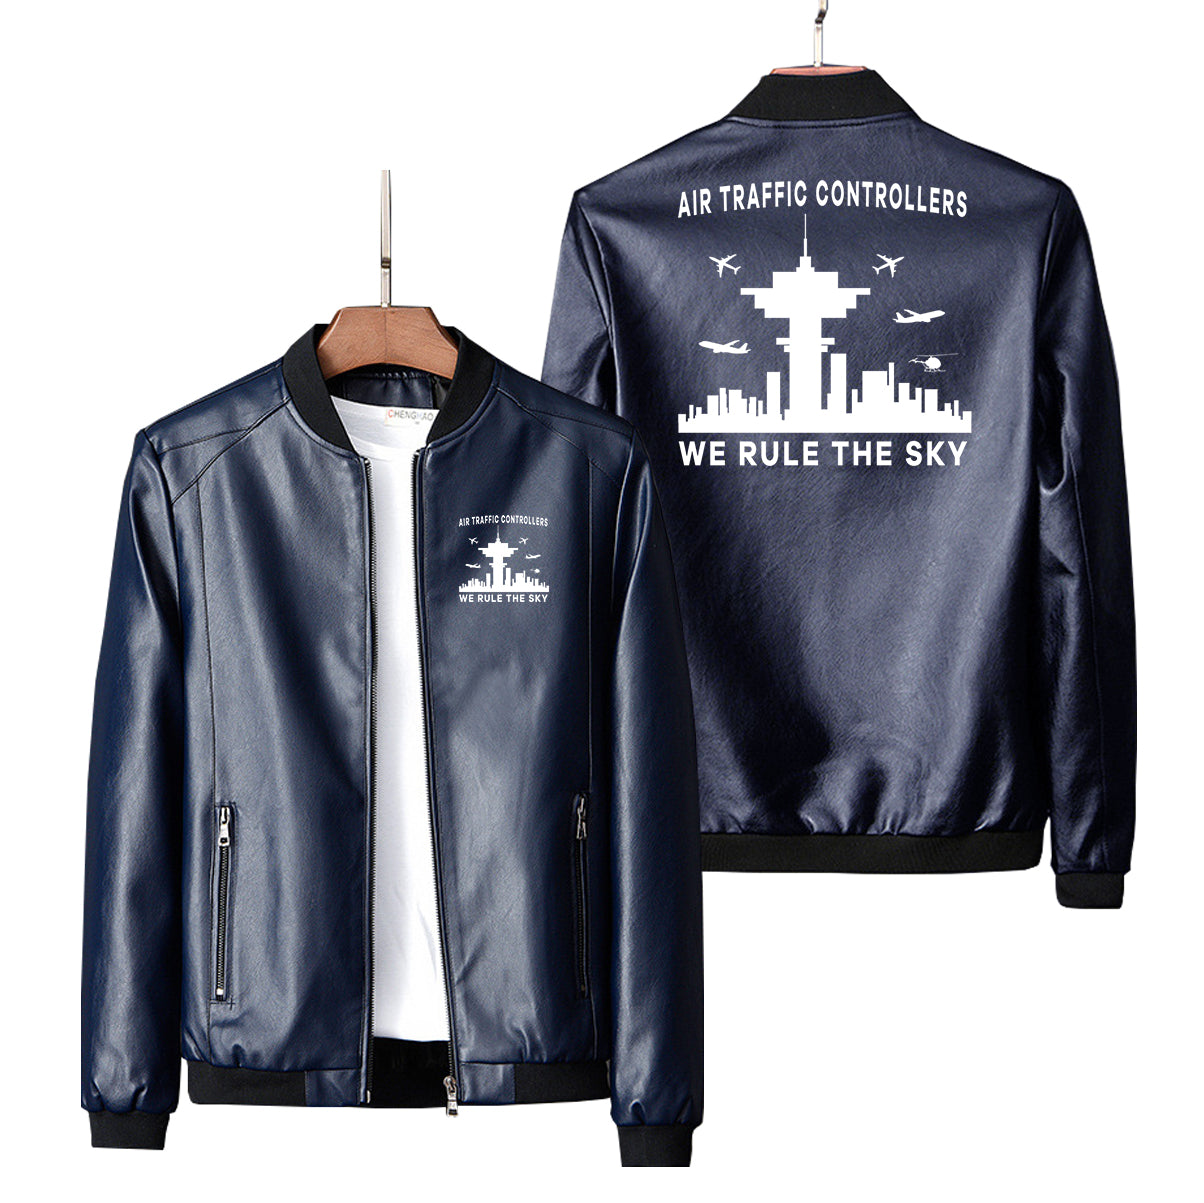 Air Traffic Controllers - We Rule The Sky Designed PU Leather Jackets